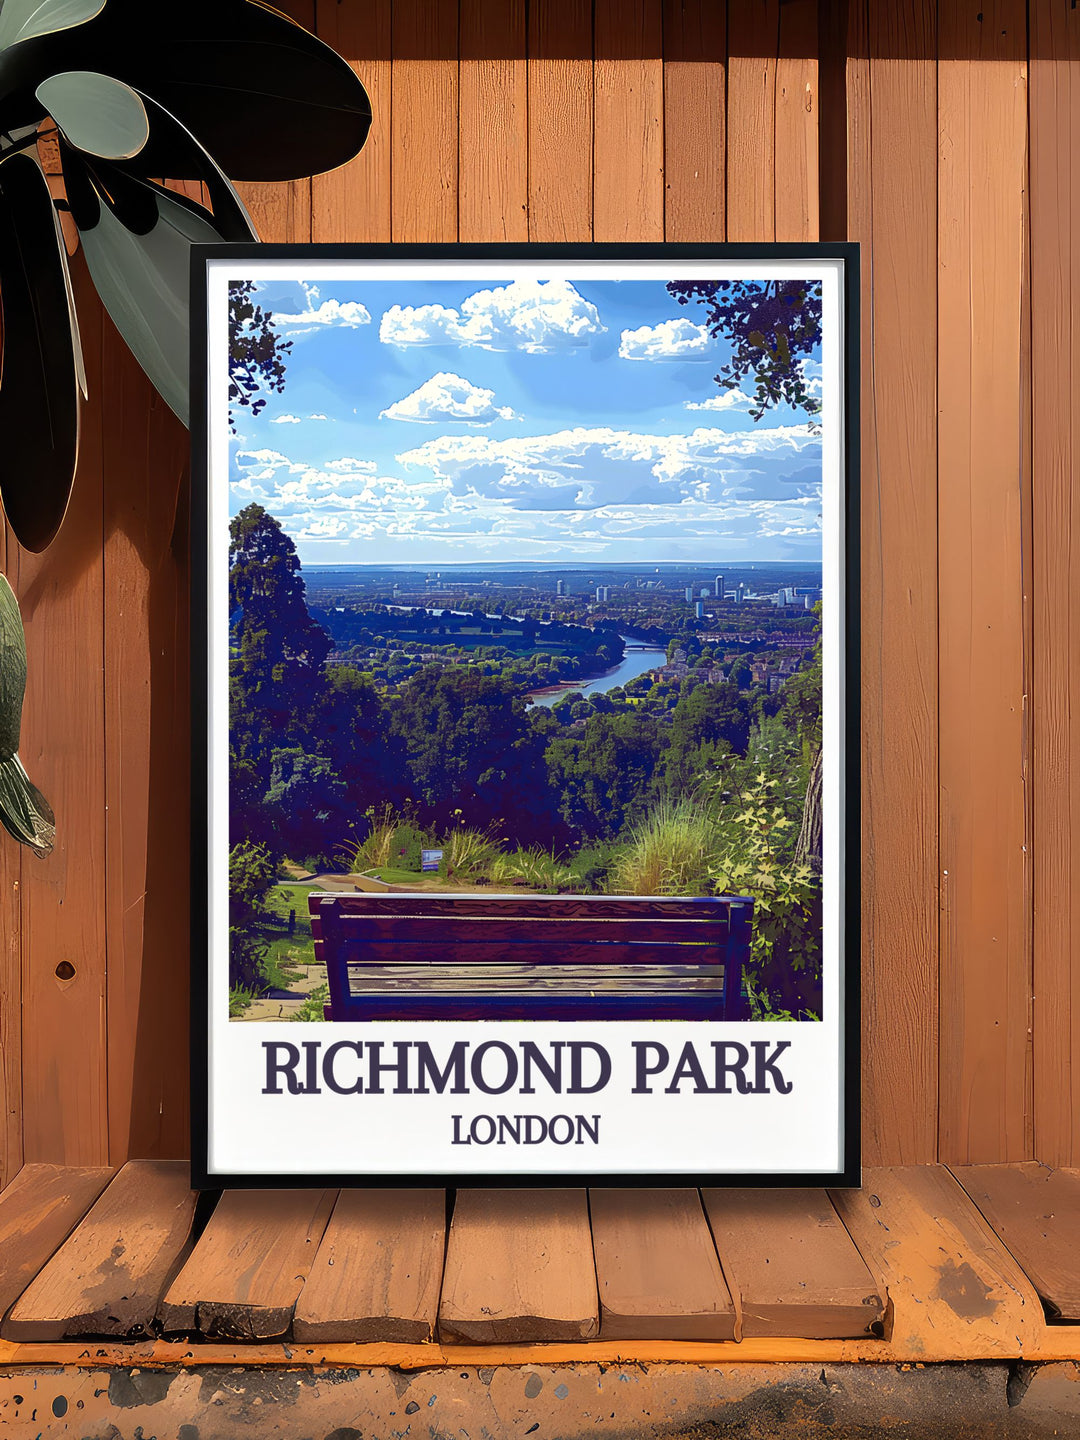 Iconic London Art featuring beautiful prints of King Henrys Mound and Richmond Park, perfect for adding elegance to any room.